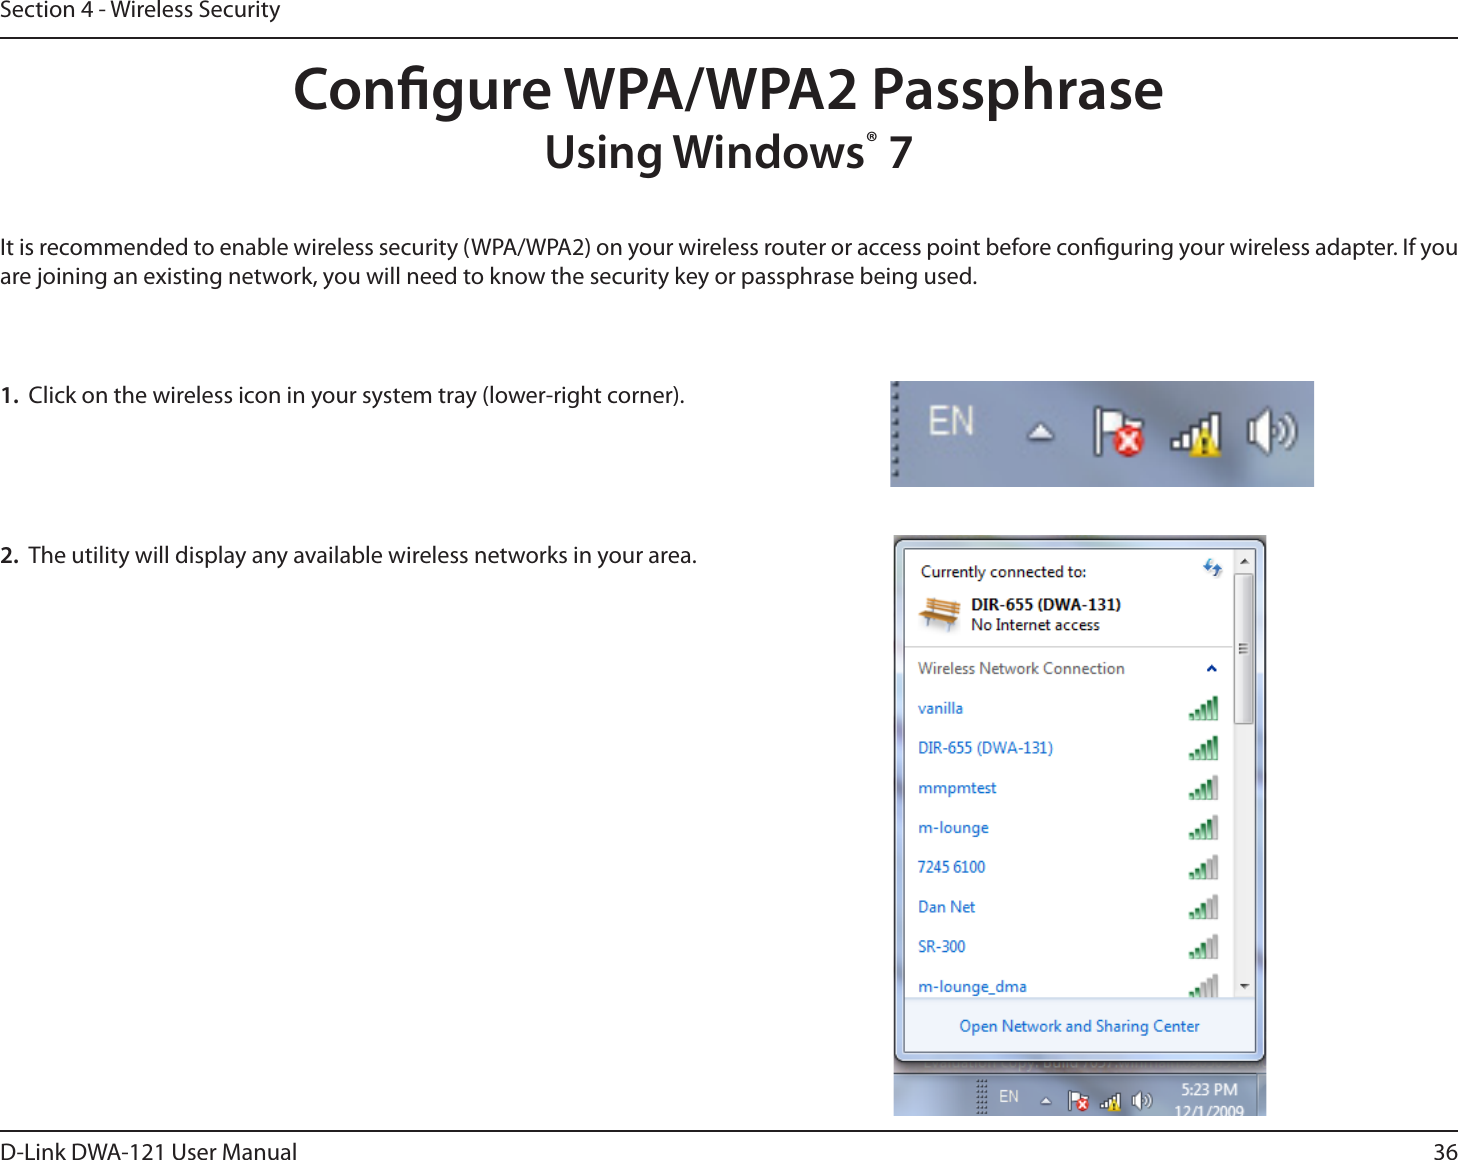 36D-Link DWA-121 User ManualSection 4 - Wireless SecurityCongure WPA/WPA2 PassphraseUsing Windows® 7It is recommended to enable wireless security (WPA/WPA2) on your wireless router or access point before conguring your wireless adapter. If you are joining an existing network, you will need to know the security key or passphrase being used.2.  The utility will display any available wireless networks in your area.1.  Click on the wireless icon in your system tray (lower-right corner).